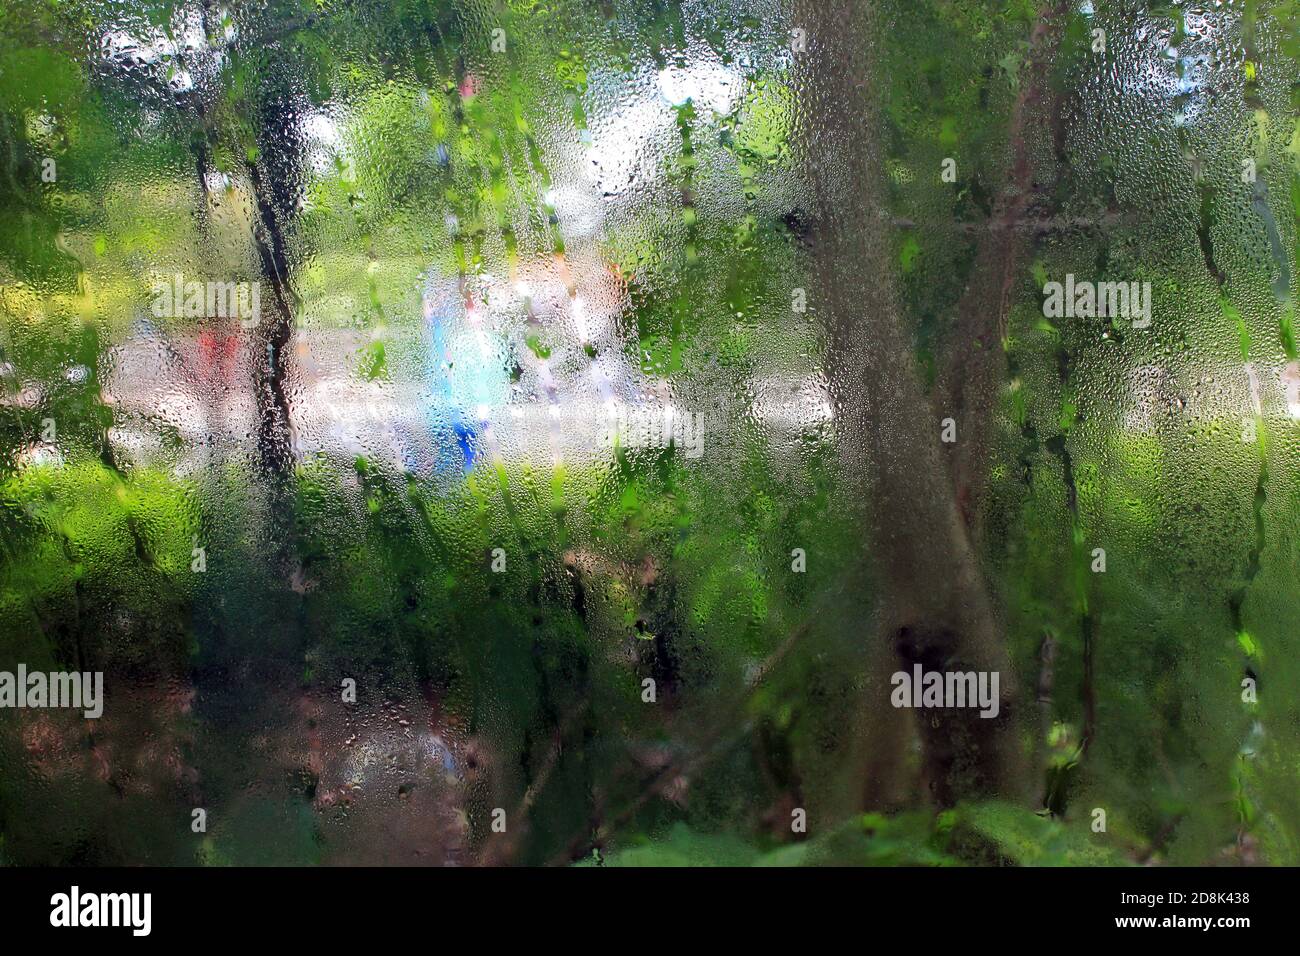 A window with condensation blurs the outside world. Stock Photo